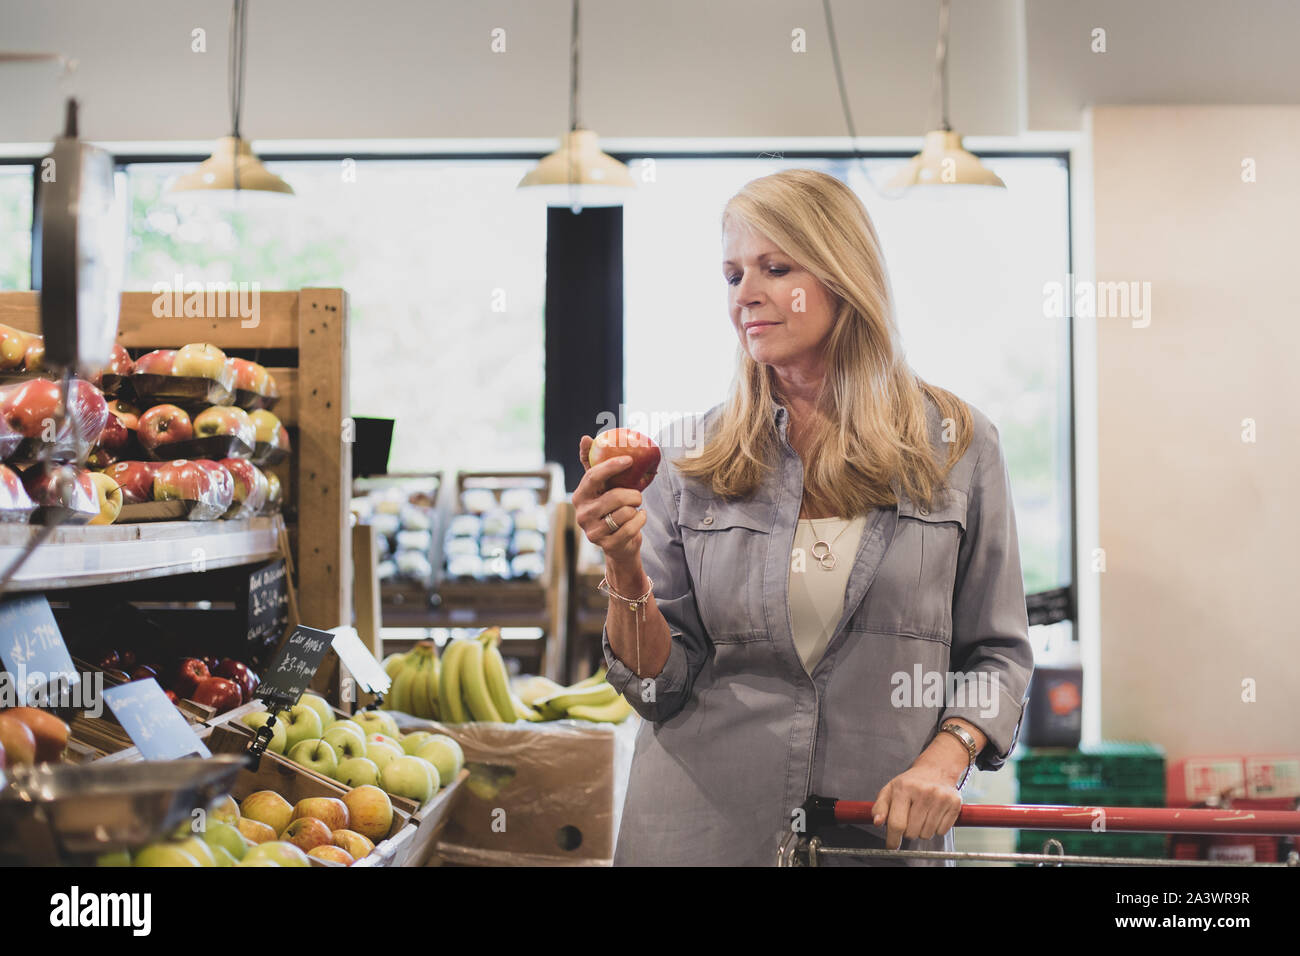 Senior female shopper buying apples in a grocery store Stock Photo